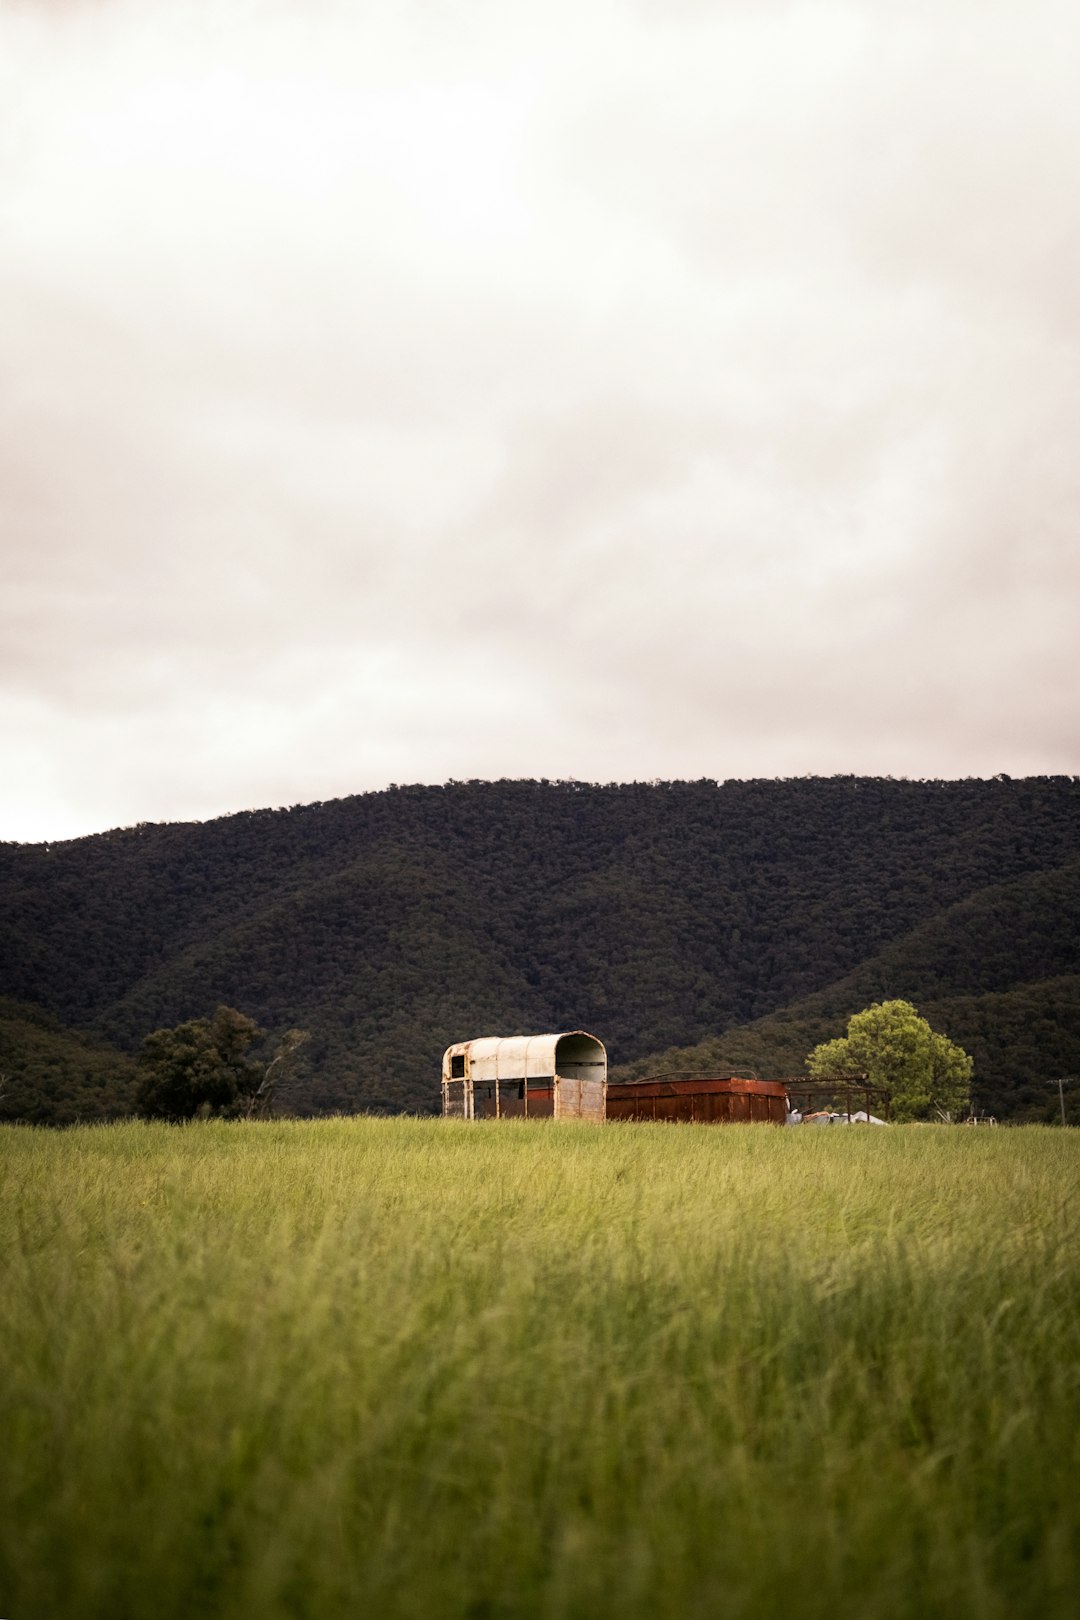 brown wooden house on green grass field near green mountains under white cloudy sky during daytime